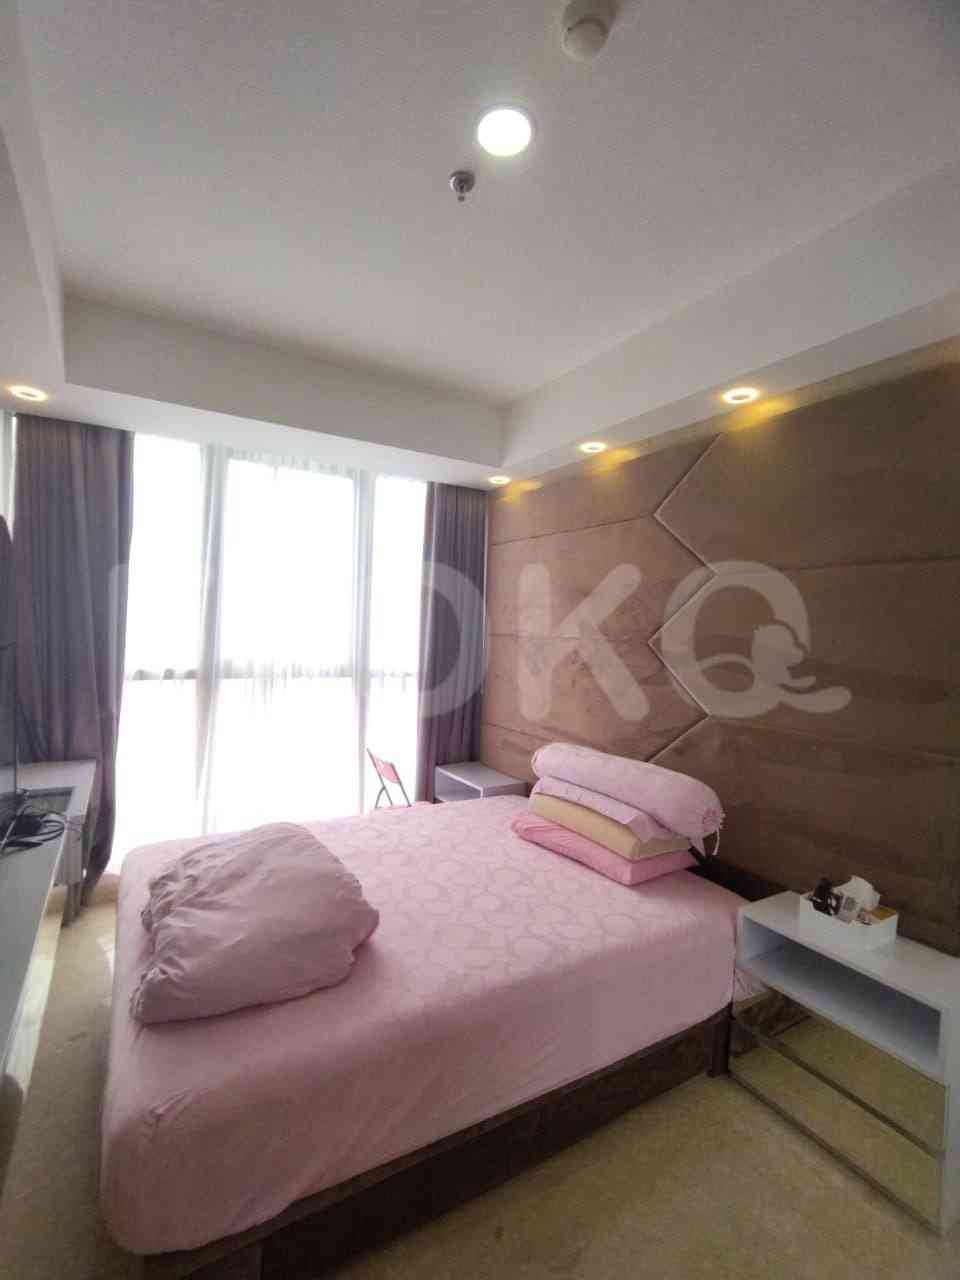 3 Bedroom on 25th Floor for Rent in Gold Coast Apartment - fka079 3